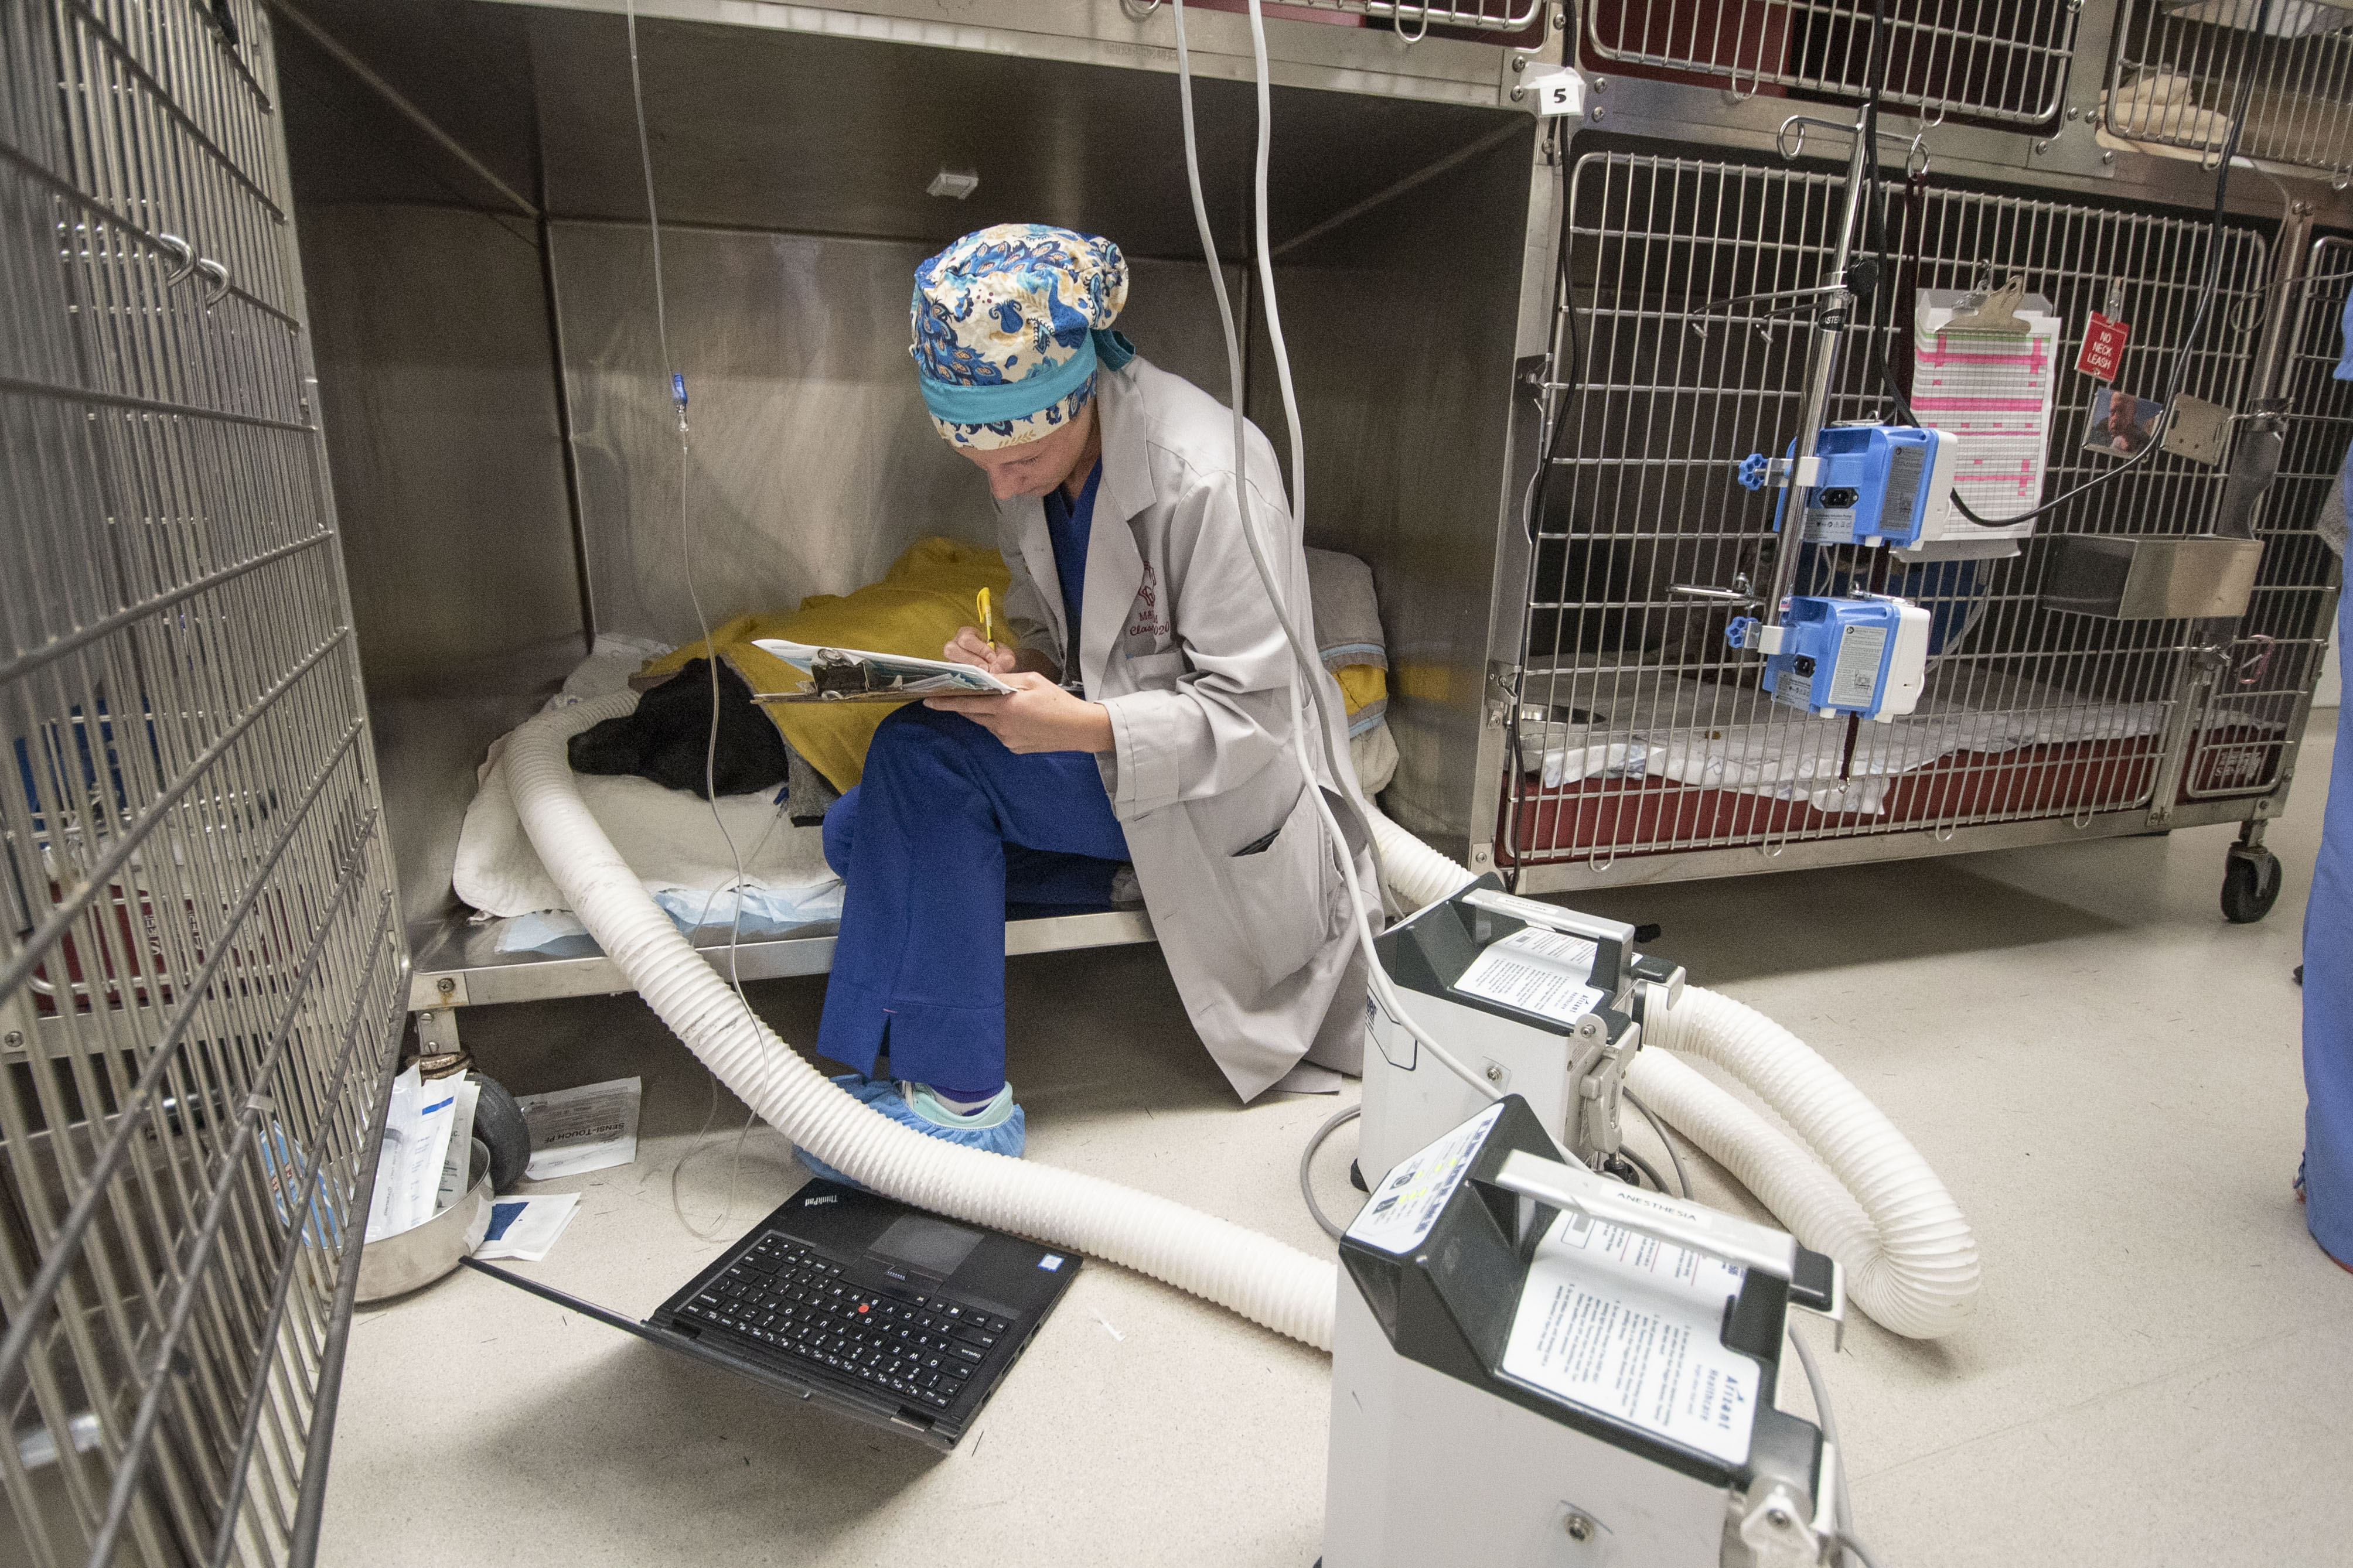 A veterinary student monitors an ICU patient